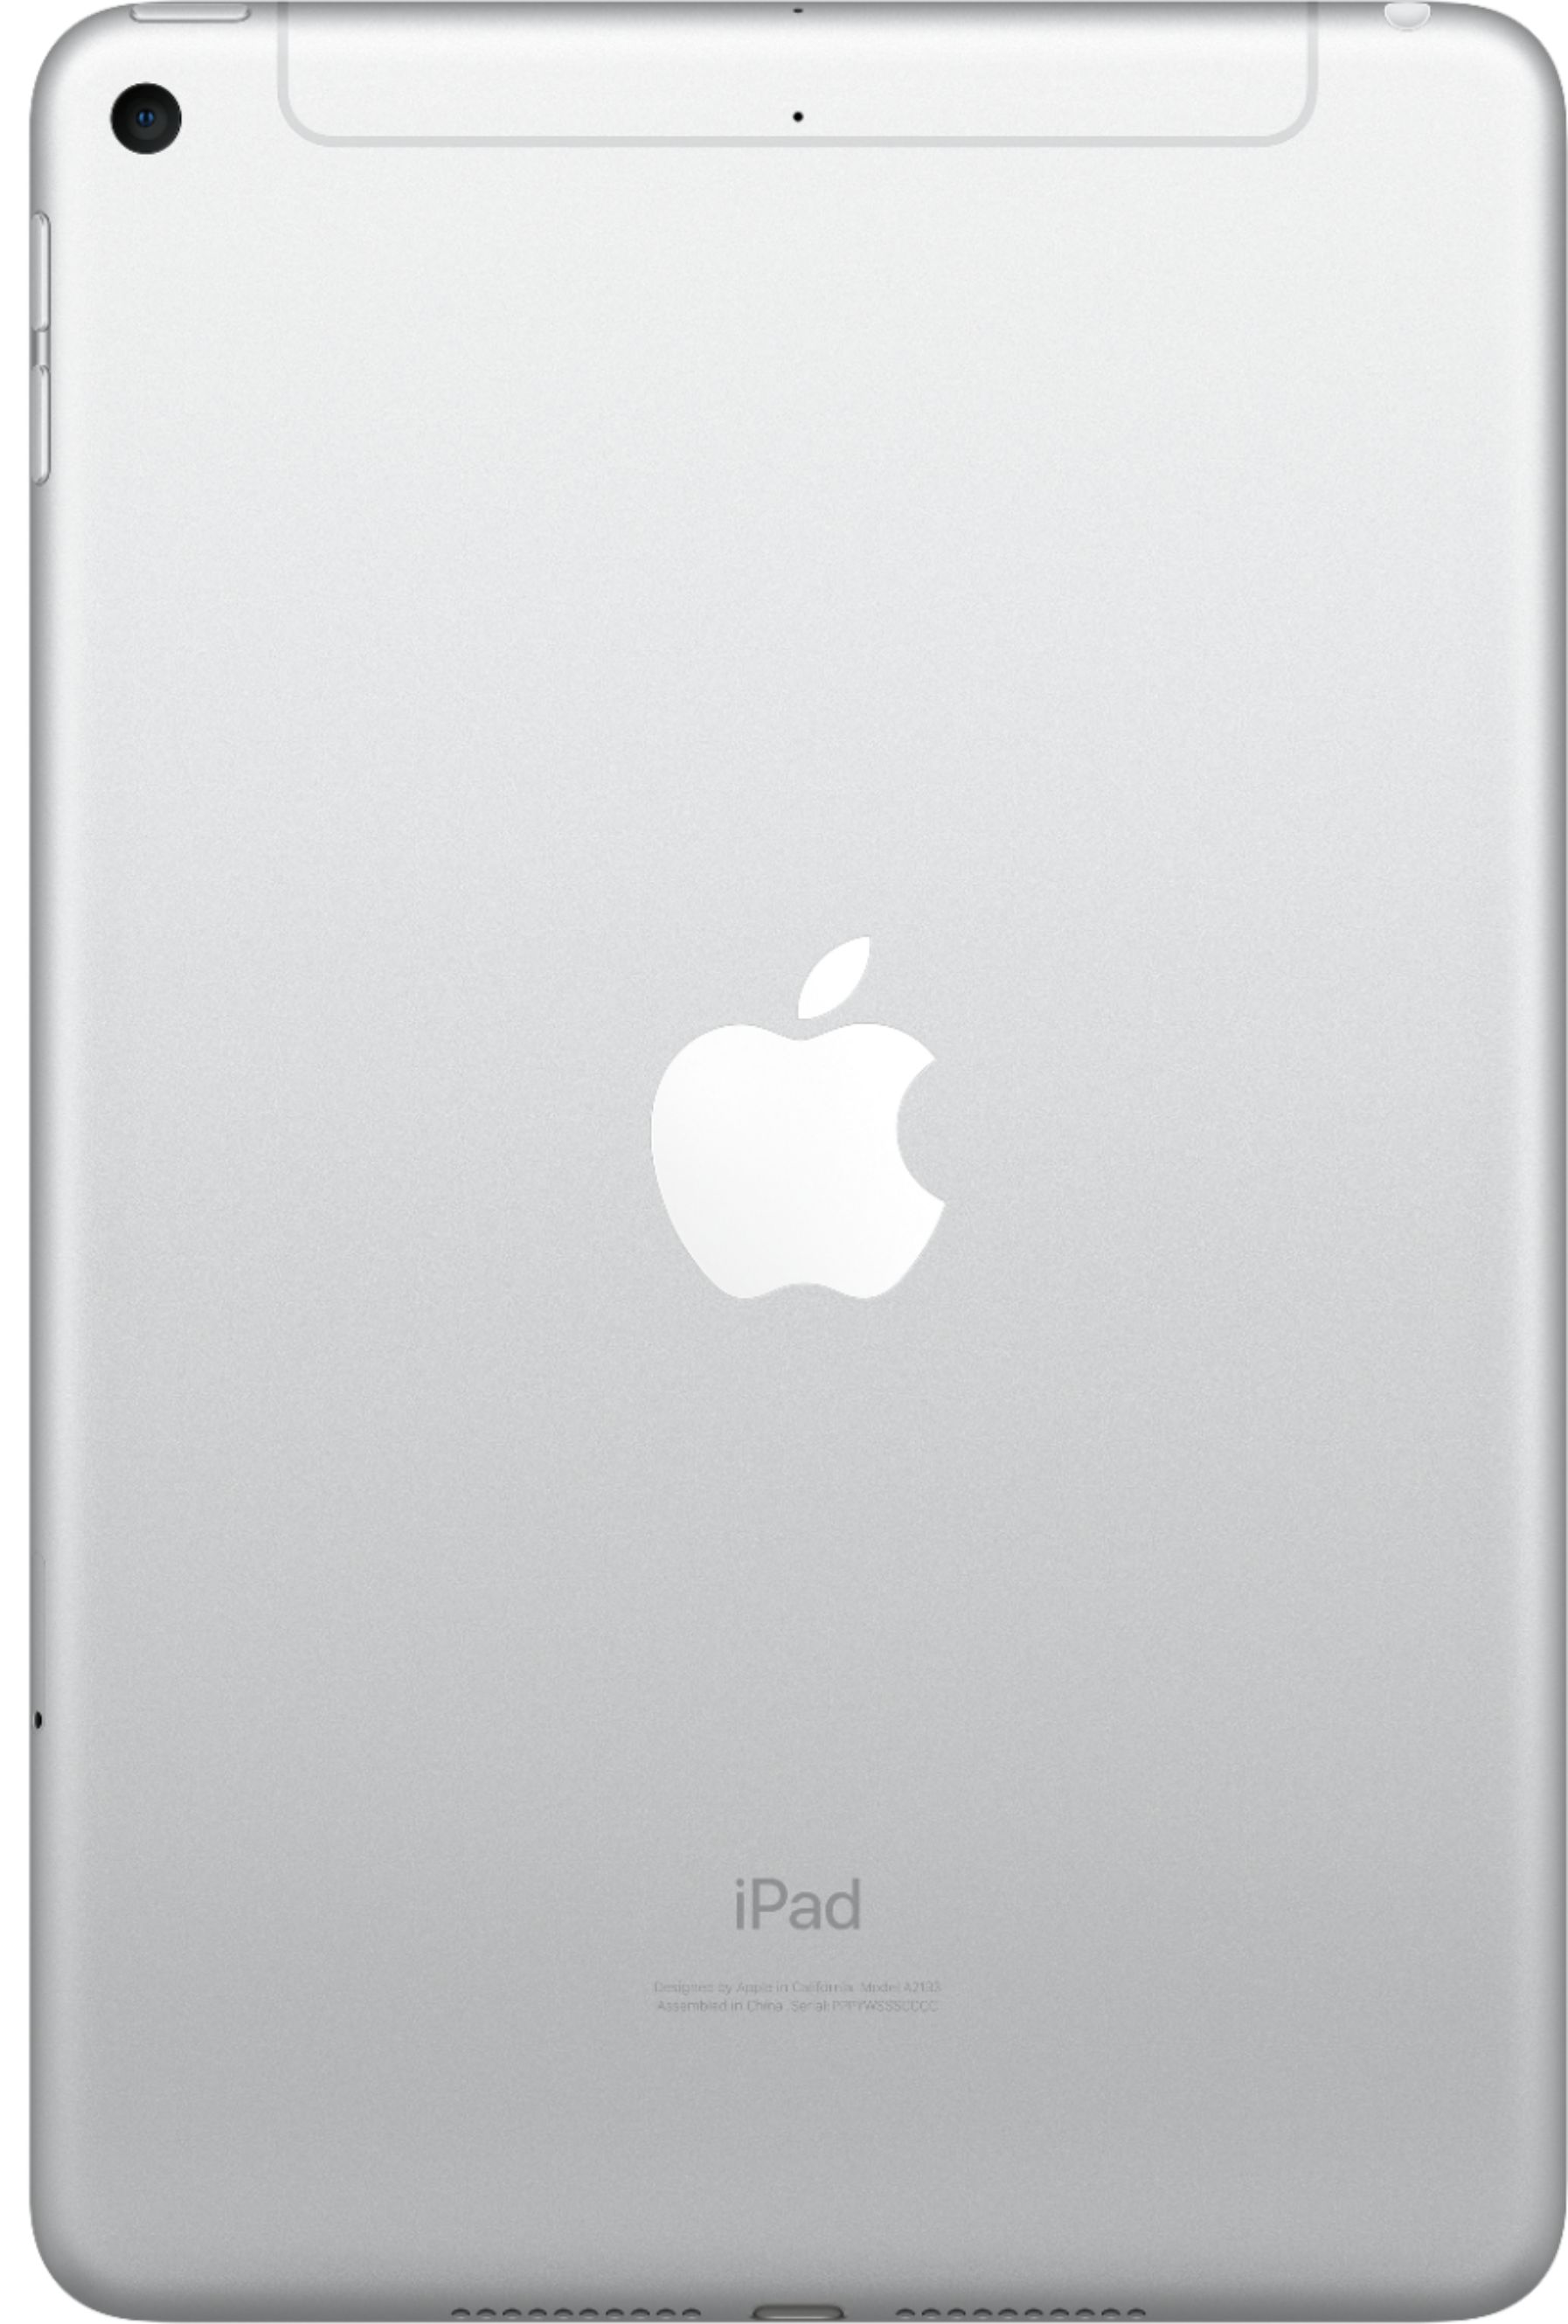 Back View: Apple - 10.2-Inch iPad (9th Generation) with Wi-Fi - 64GB - Silver